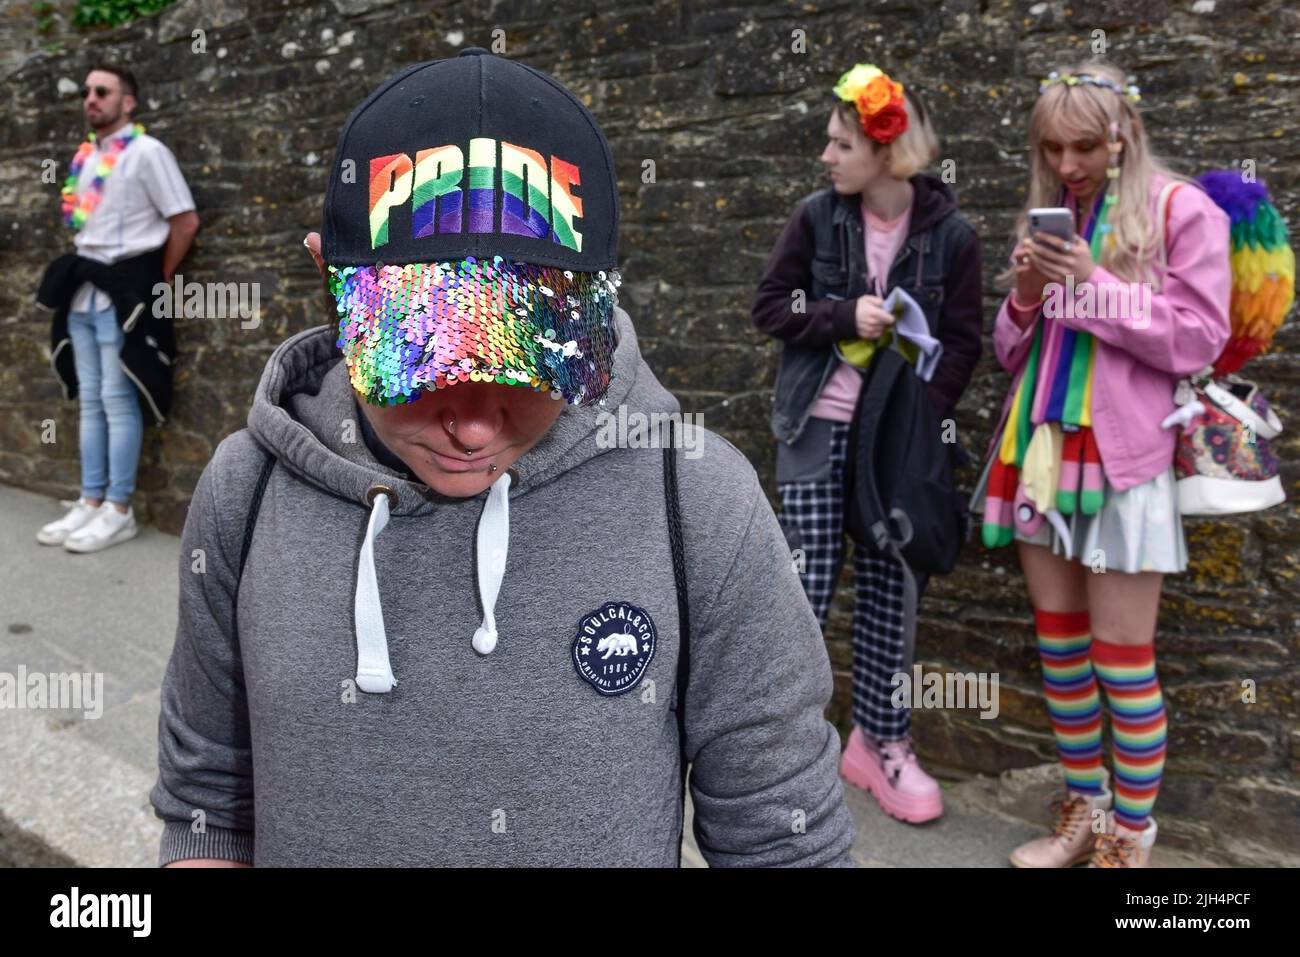 A participant wearing a colourful baseball cap in the vibrant Cornwall Prides Pride parade in Newquay Town centre in the UK. Stock Photo